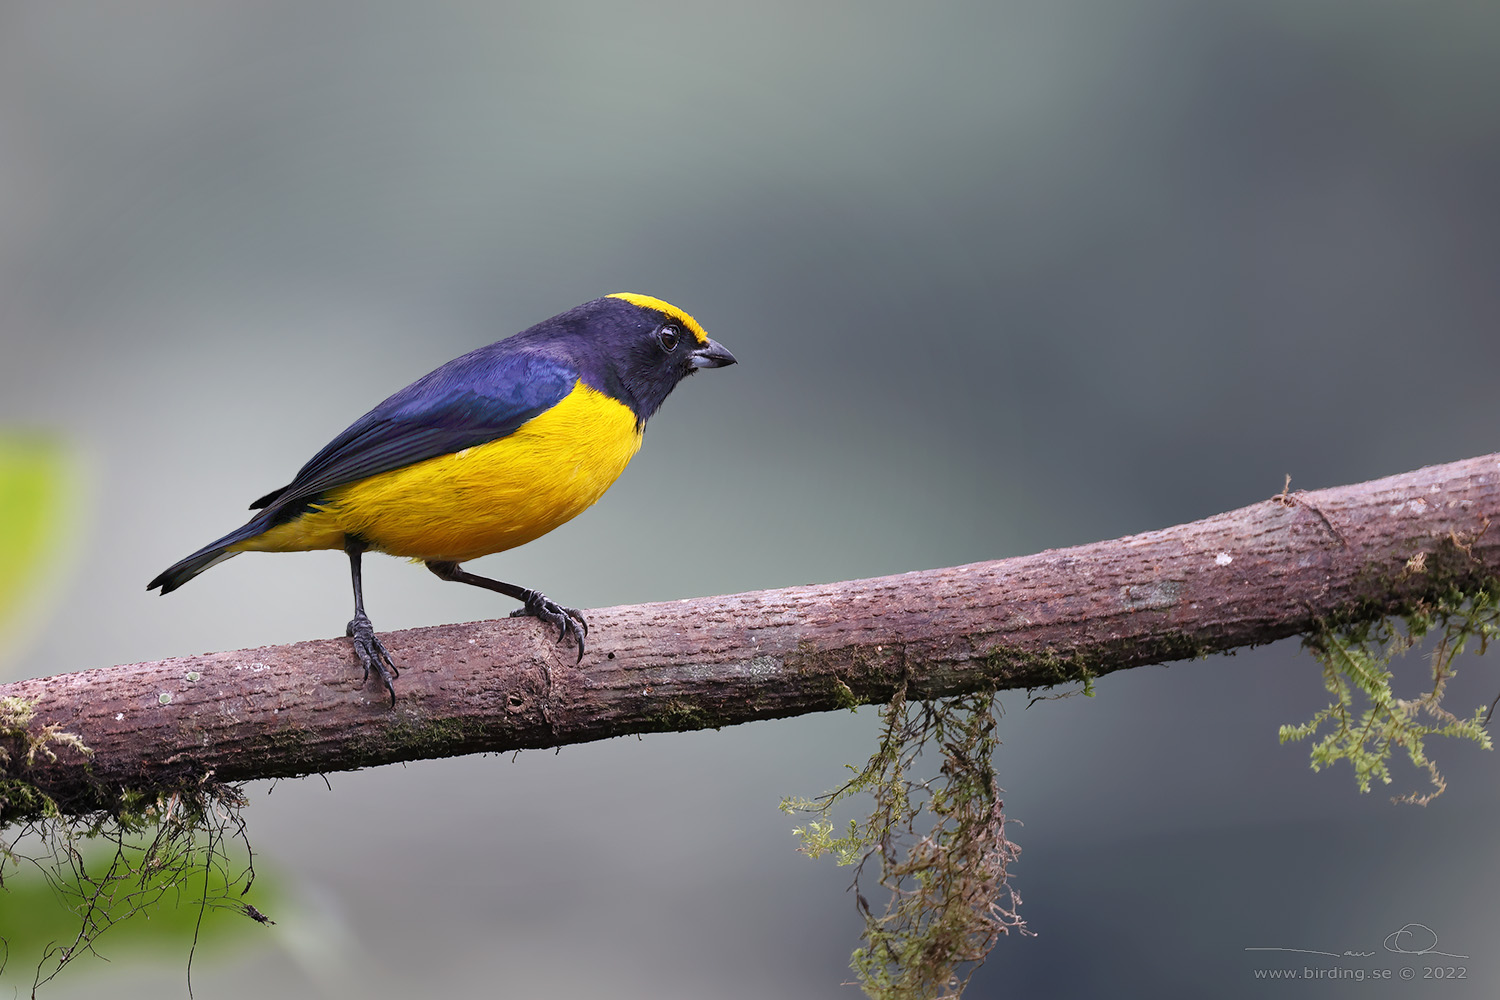 ORANGE-BELLIED EUPHONIA (Euphonia xanthogaster) - Stäng / close